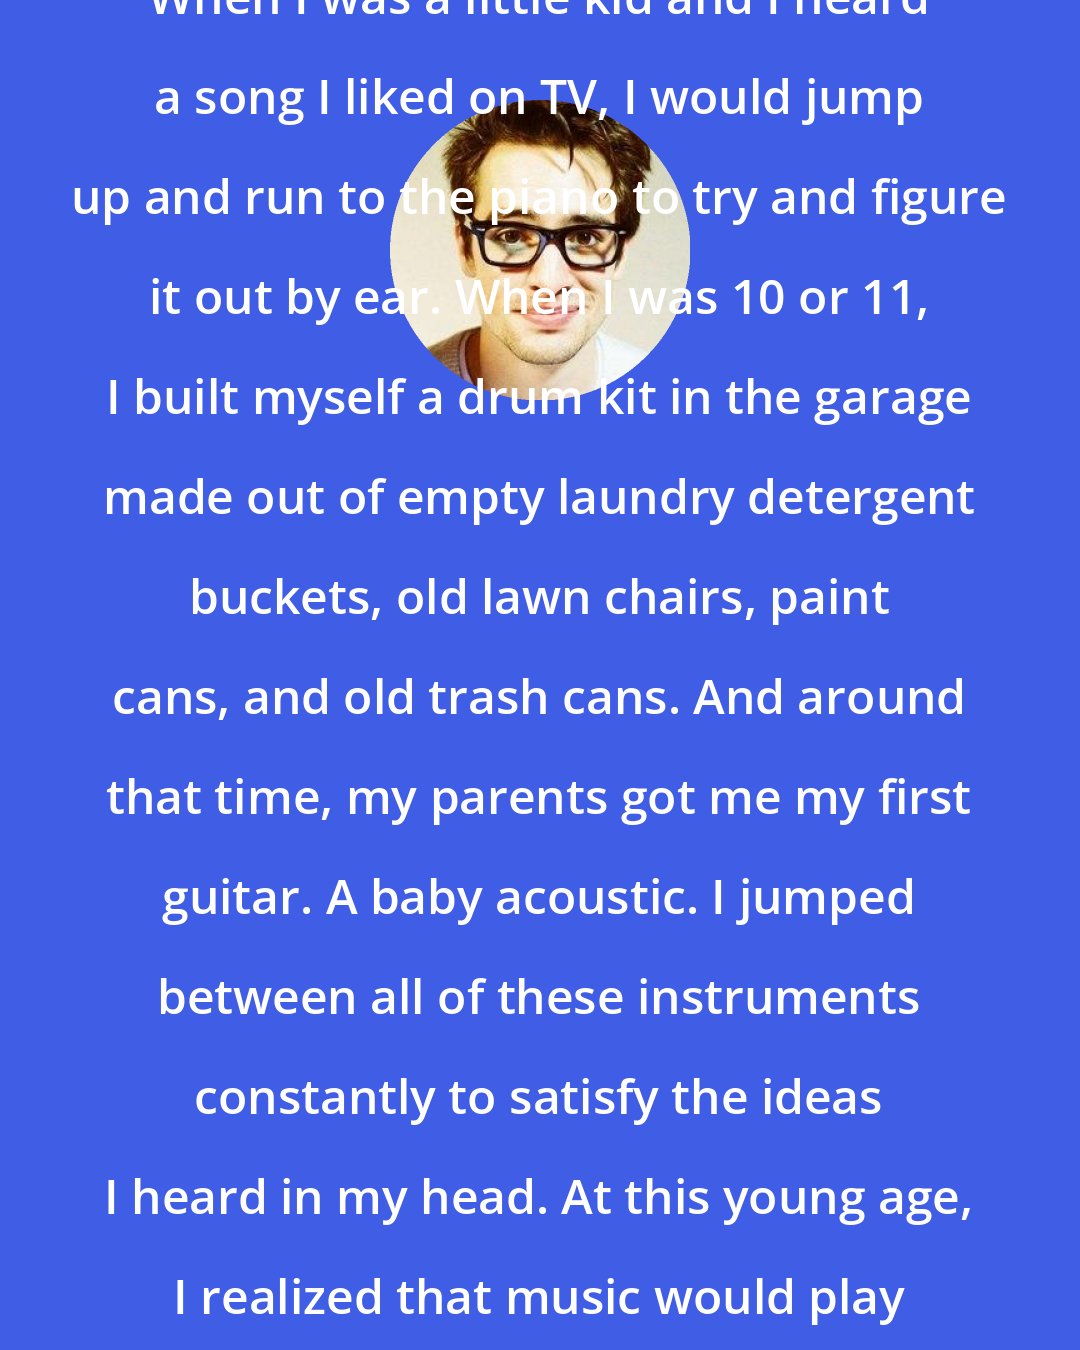 Brendon Urie: When I was a little kid and I heard a song I liked on TV, I would jump up and run to the piano to try and figure it out by ear. When I was 10 or 11, I built myself a drum kit in the garage made out of empty laundry detergent buckets, old lawn chairs, paint cans, and old trash cans. And around that time, my parents got me my first guitar. A baby acoustic. I jumped between all of these instruments constantly to satisfy the ideas I heard in my head. At this young age, I realized that music would play a huge part in my life.